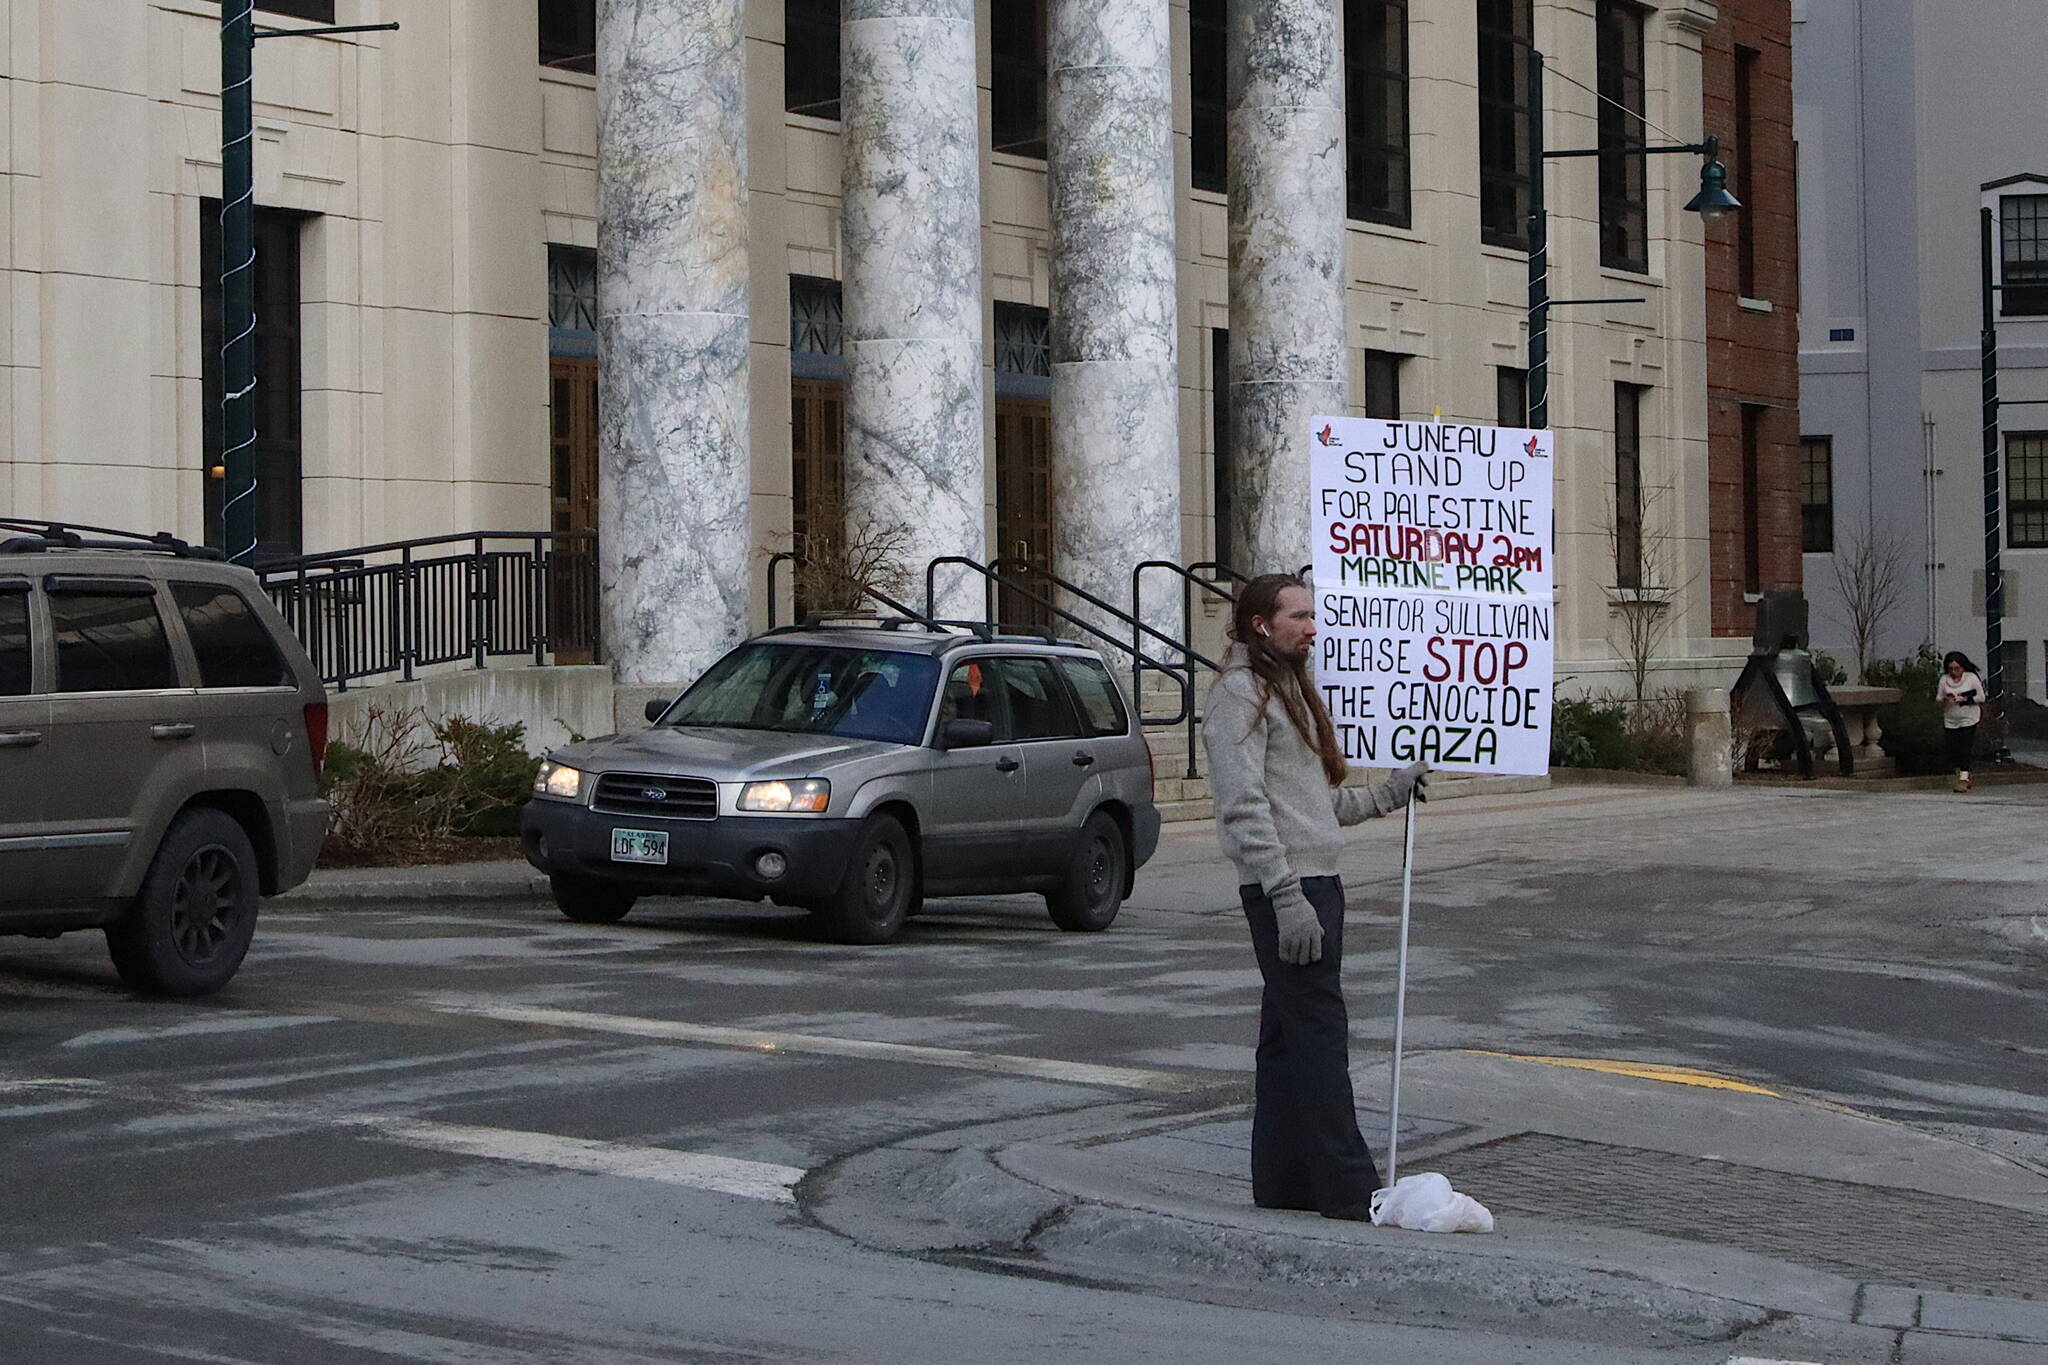 Eric Bookless holds up a protest sign regarding the situation in Gaza while standing in a traffic median next to the Alaska State Capitol on Wednesday. Gov. Mike Dunleavy introduced a bill during the day that would increase the penalties and definitions of illegal protests, although Bookless’ actions do not appear to fall under its provisions. (Mark Sabbatini / Juneau Empire)